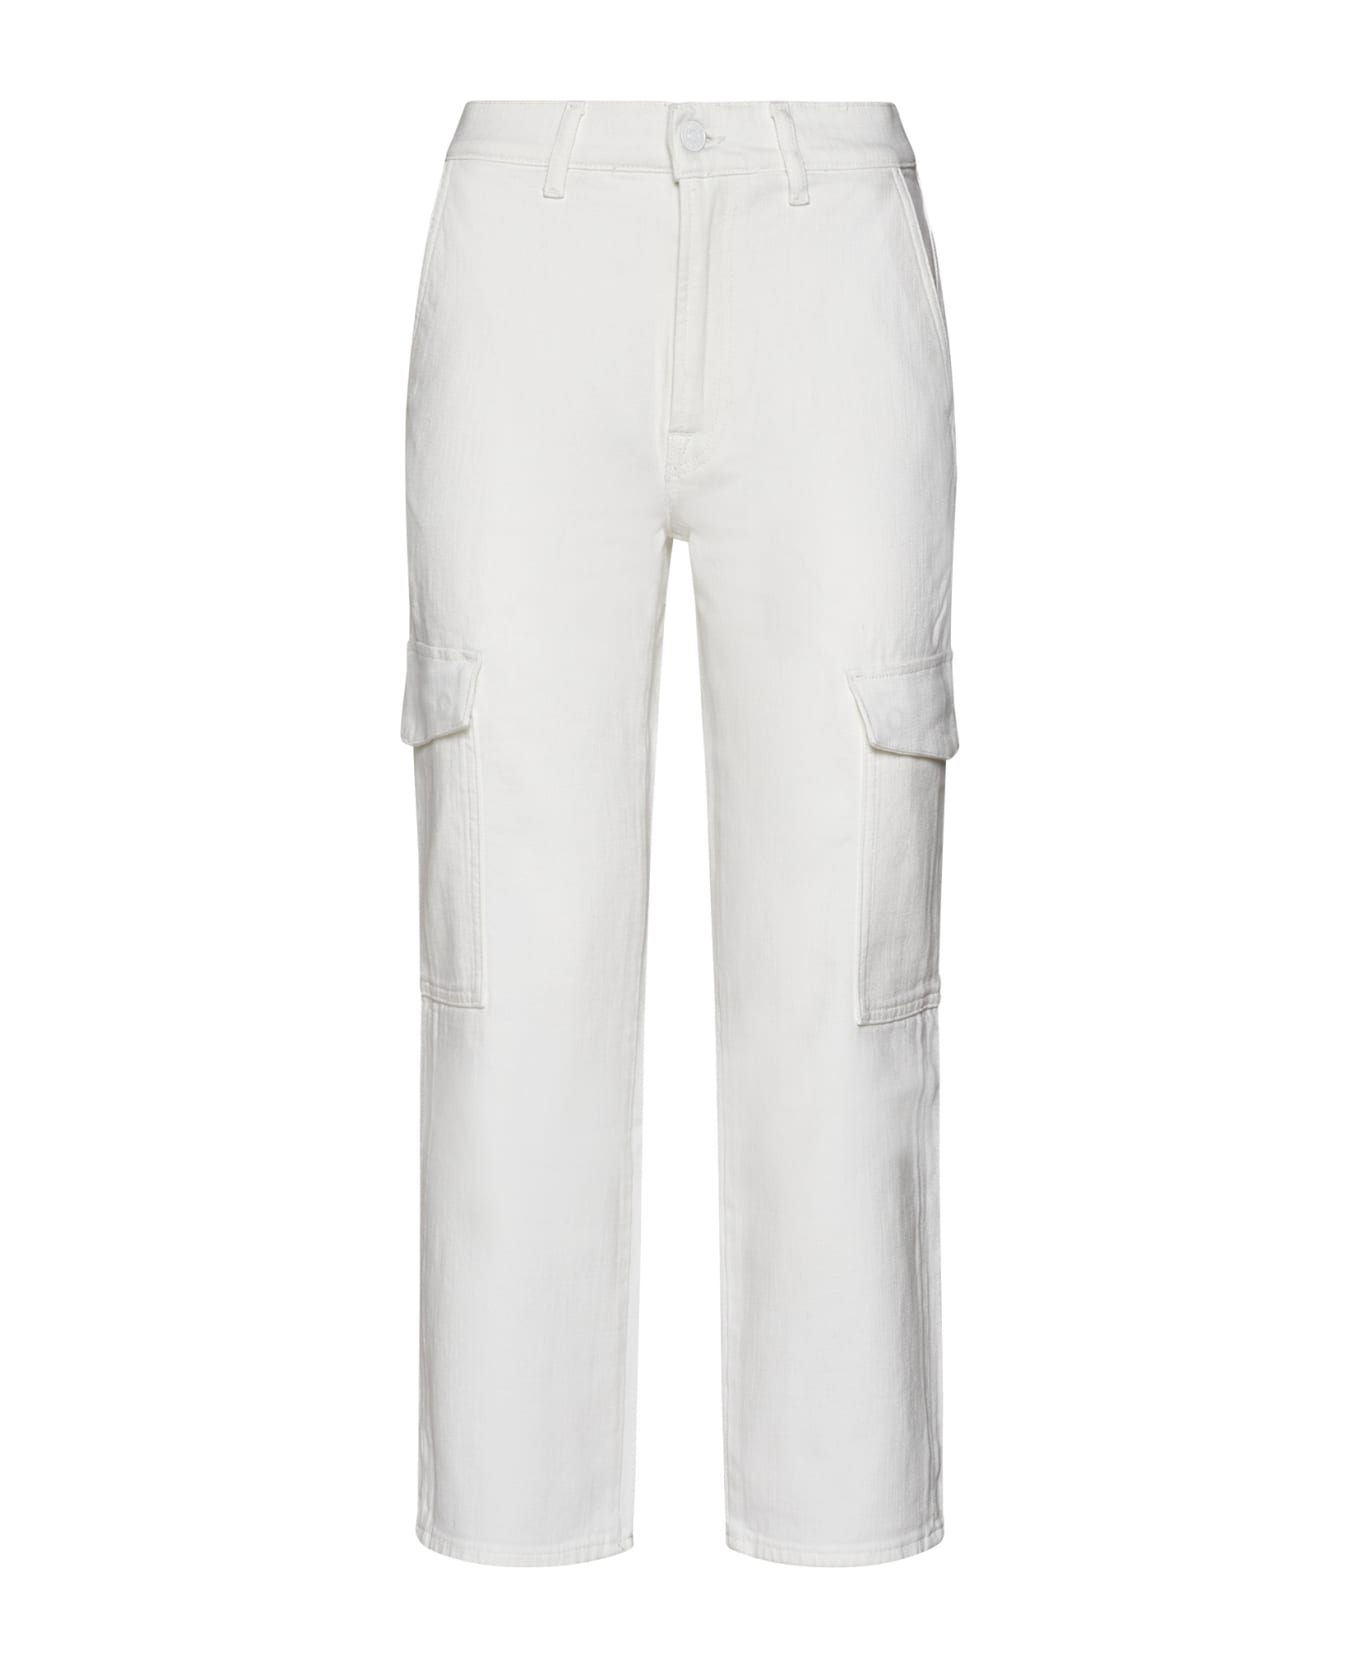 7 For All Mankind Jeans - White ボトムス